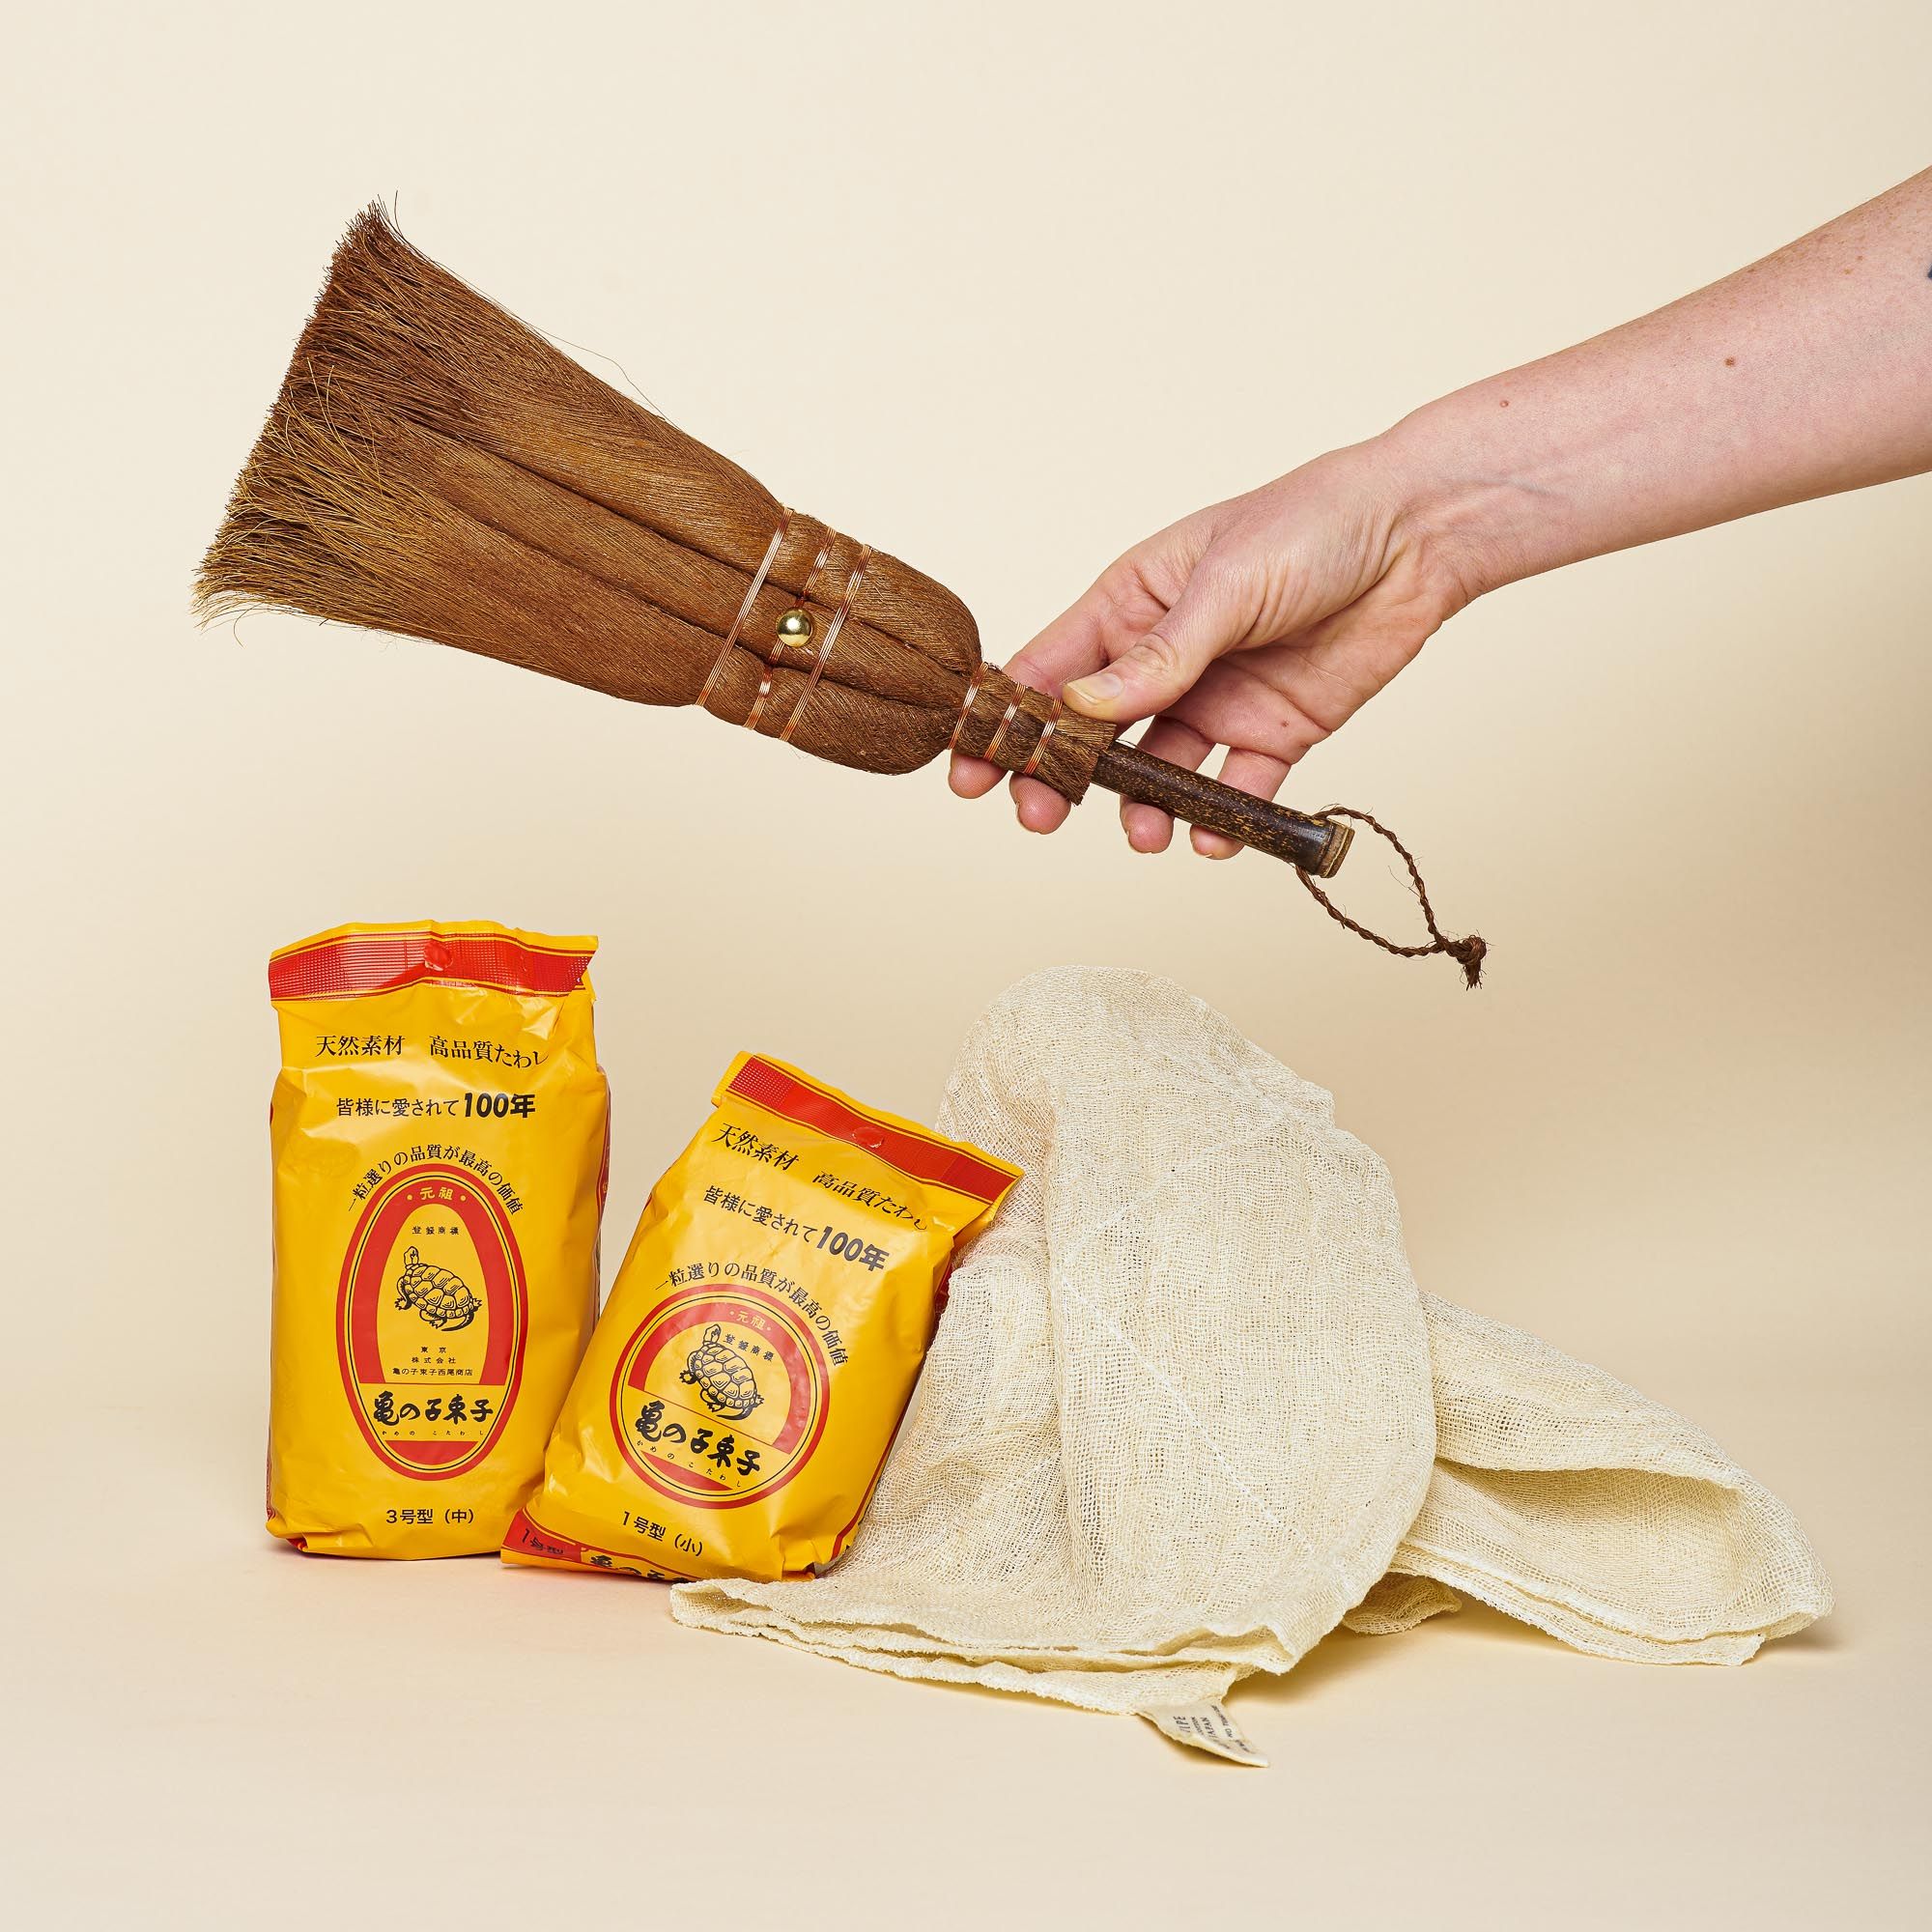 A natural broom for sweeping, two natural brushes for scrubbing, and white towel